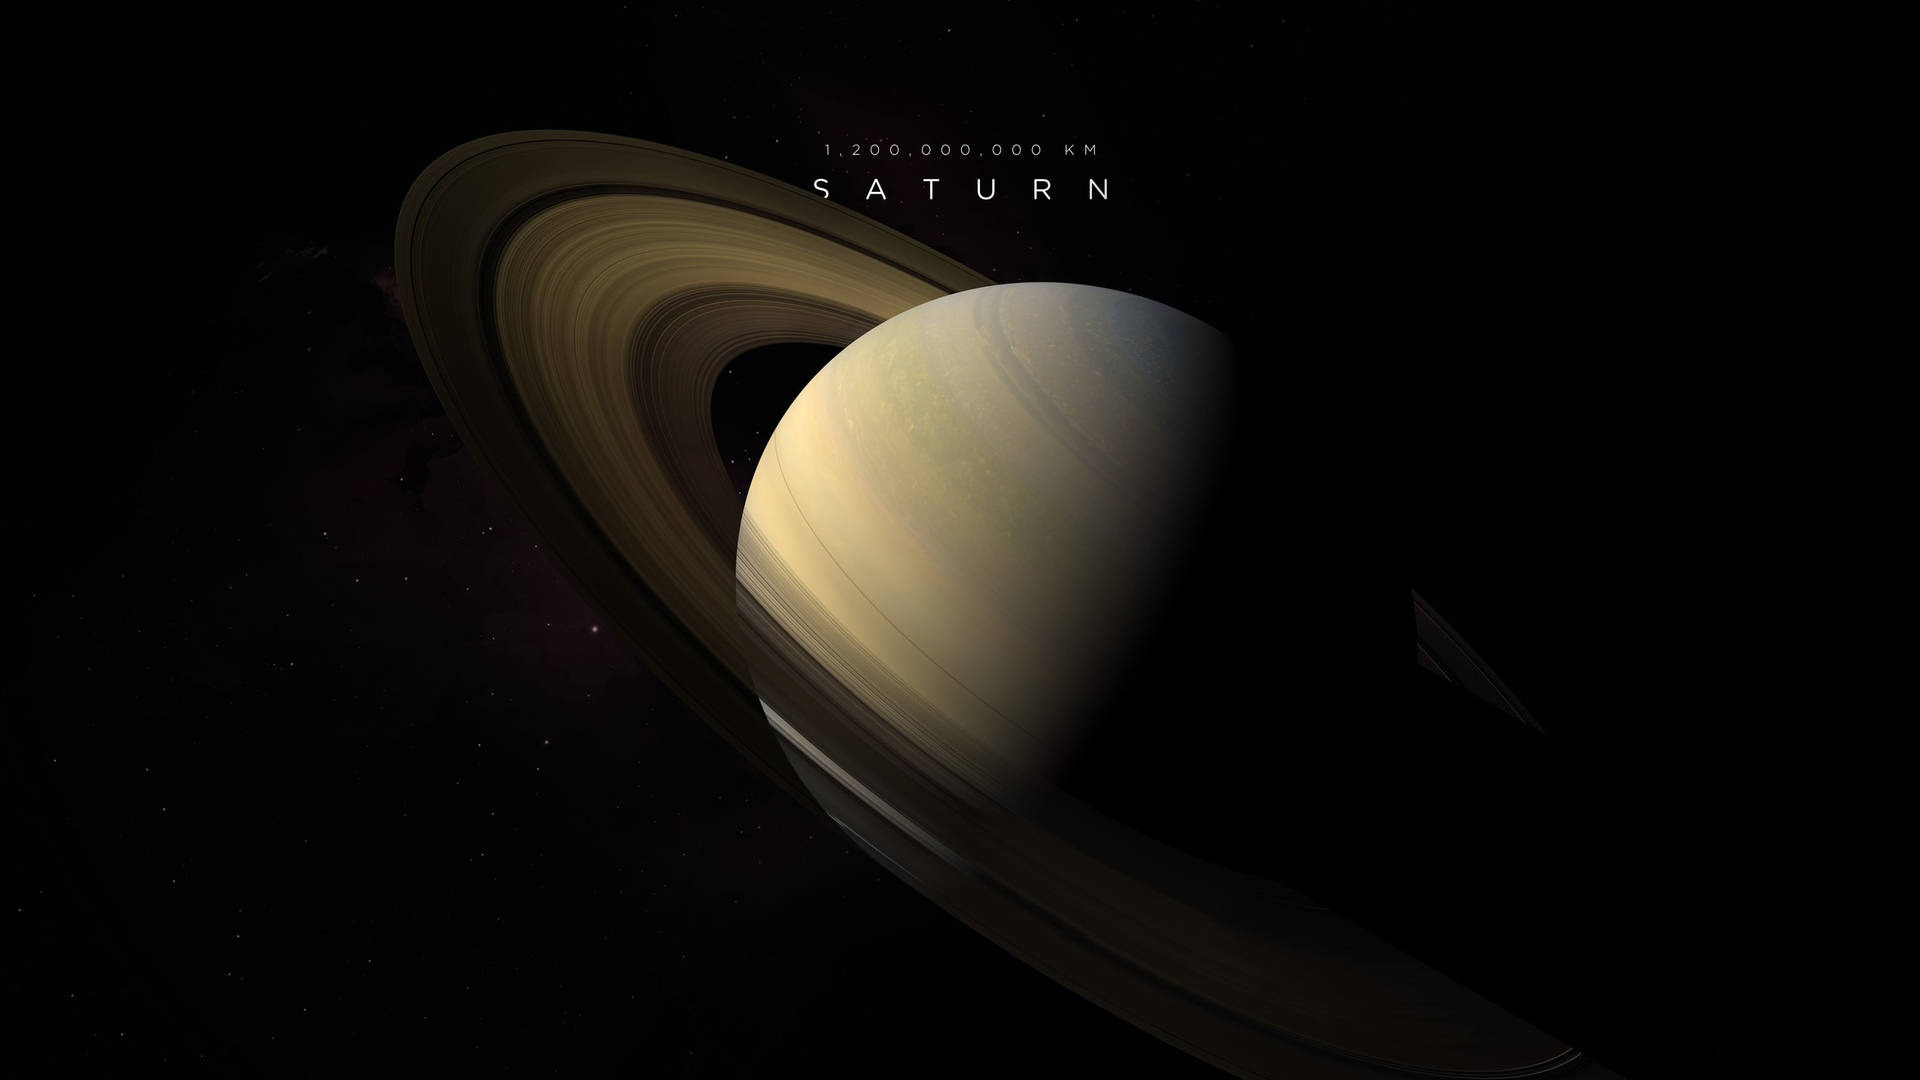 20 Sci Fi Saturn HD Wallpapers and Backgrounds